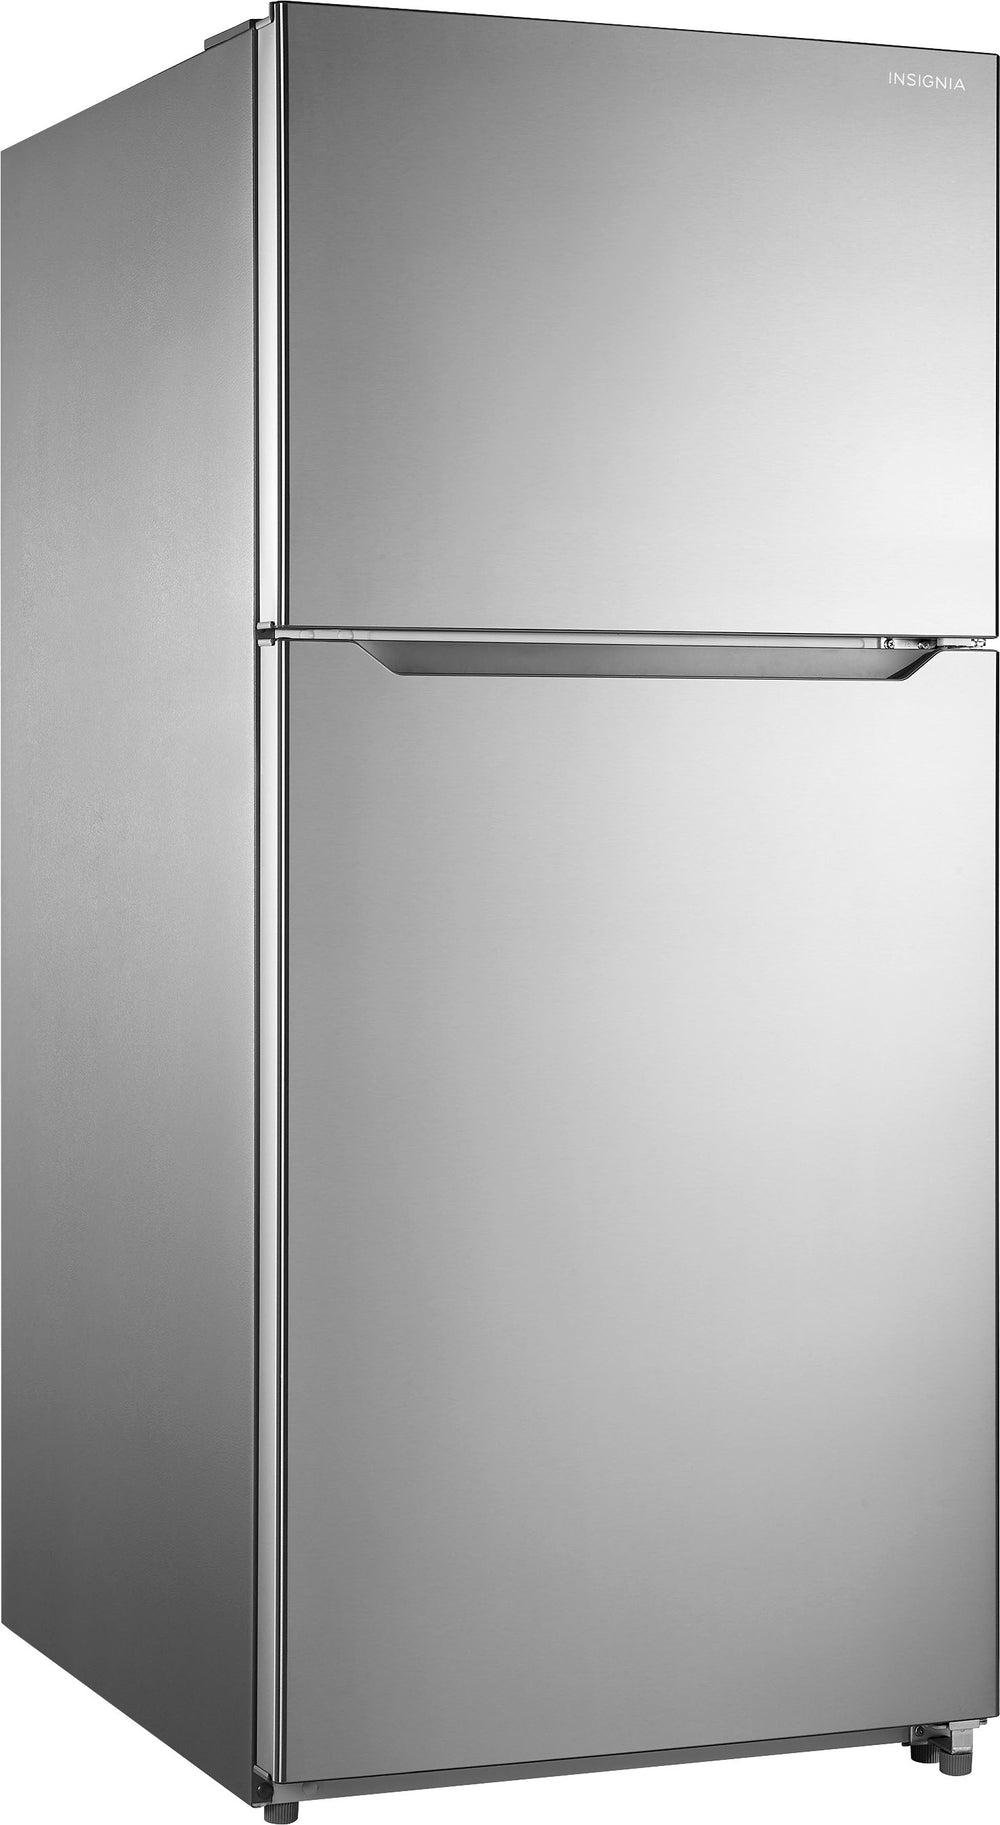 Insignia™ - 20.5 Cu. Ft. Top-Freezer Refrigerator - Stainless steel_1